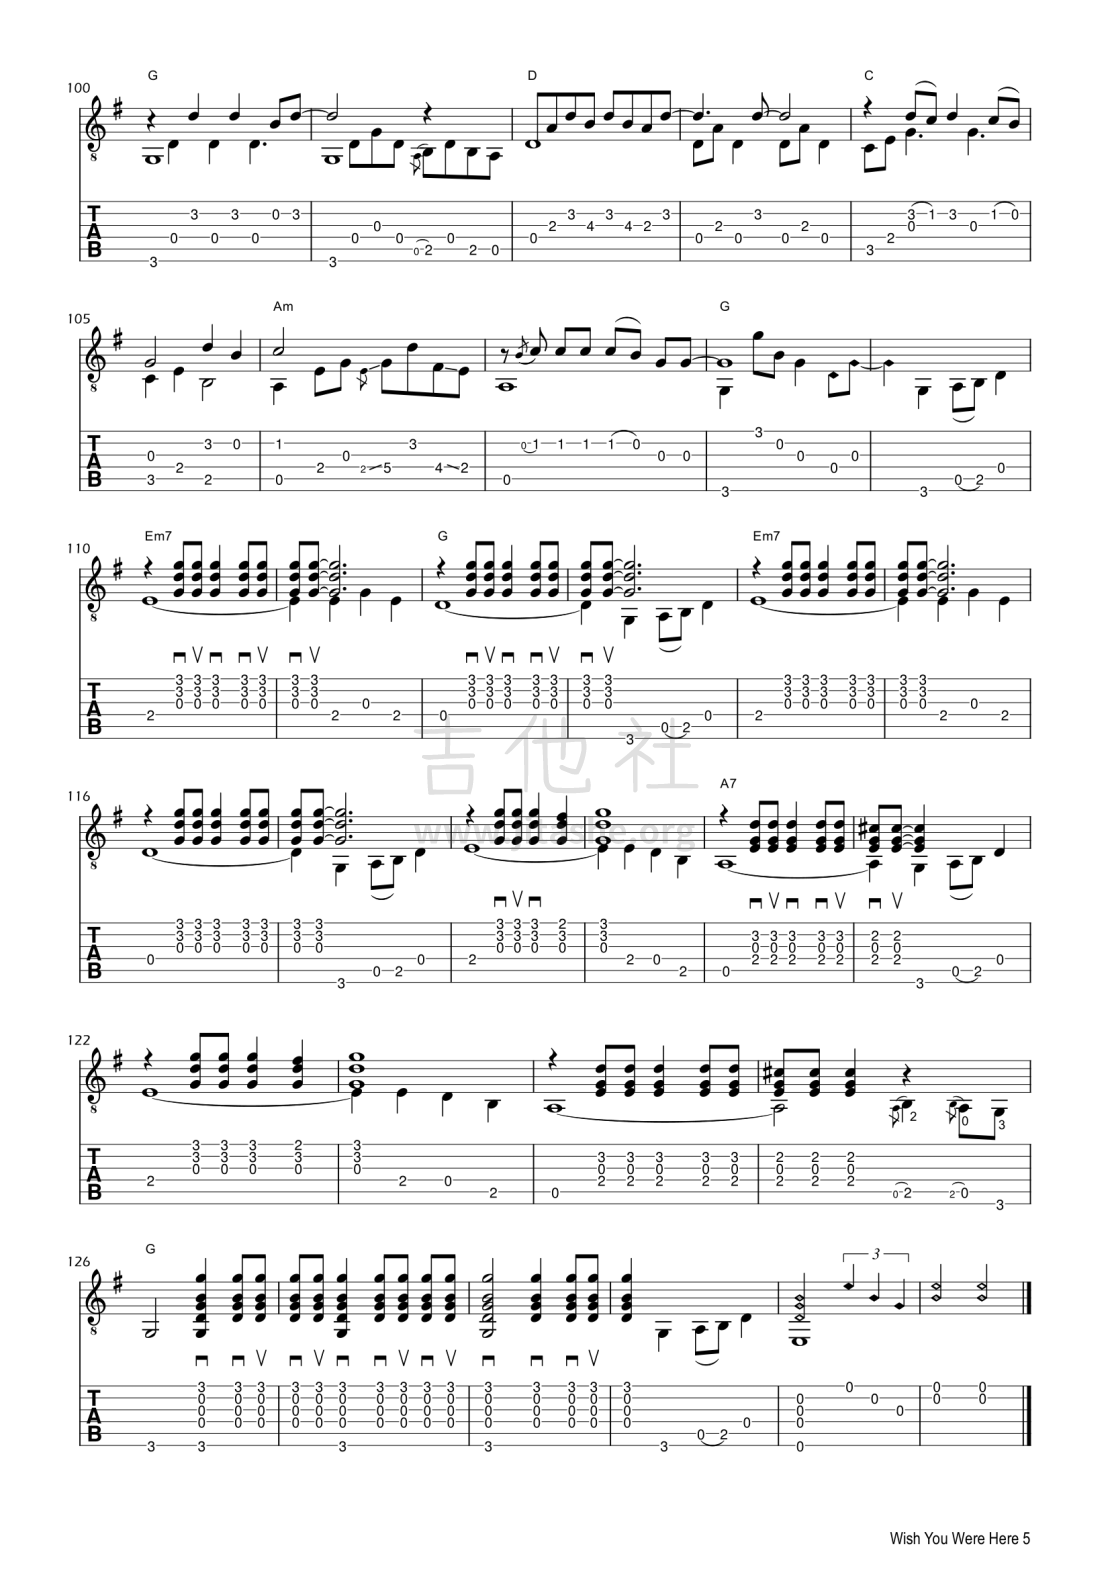 Wish You Were Here sheet music for guitar (chords) v2